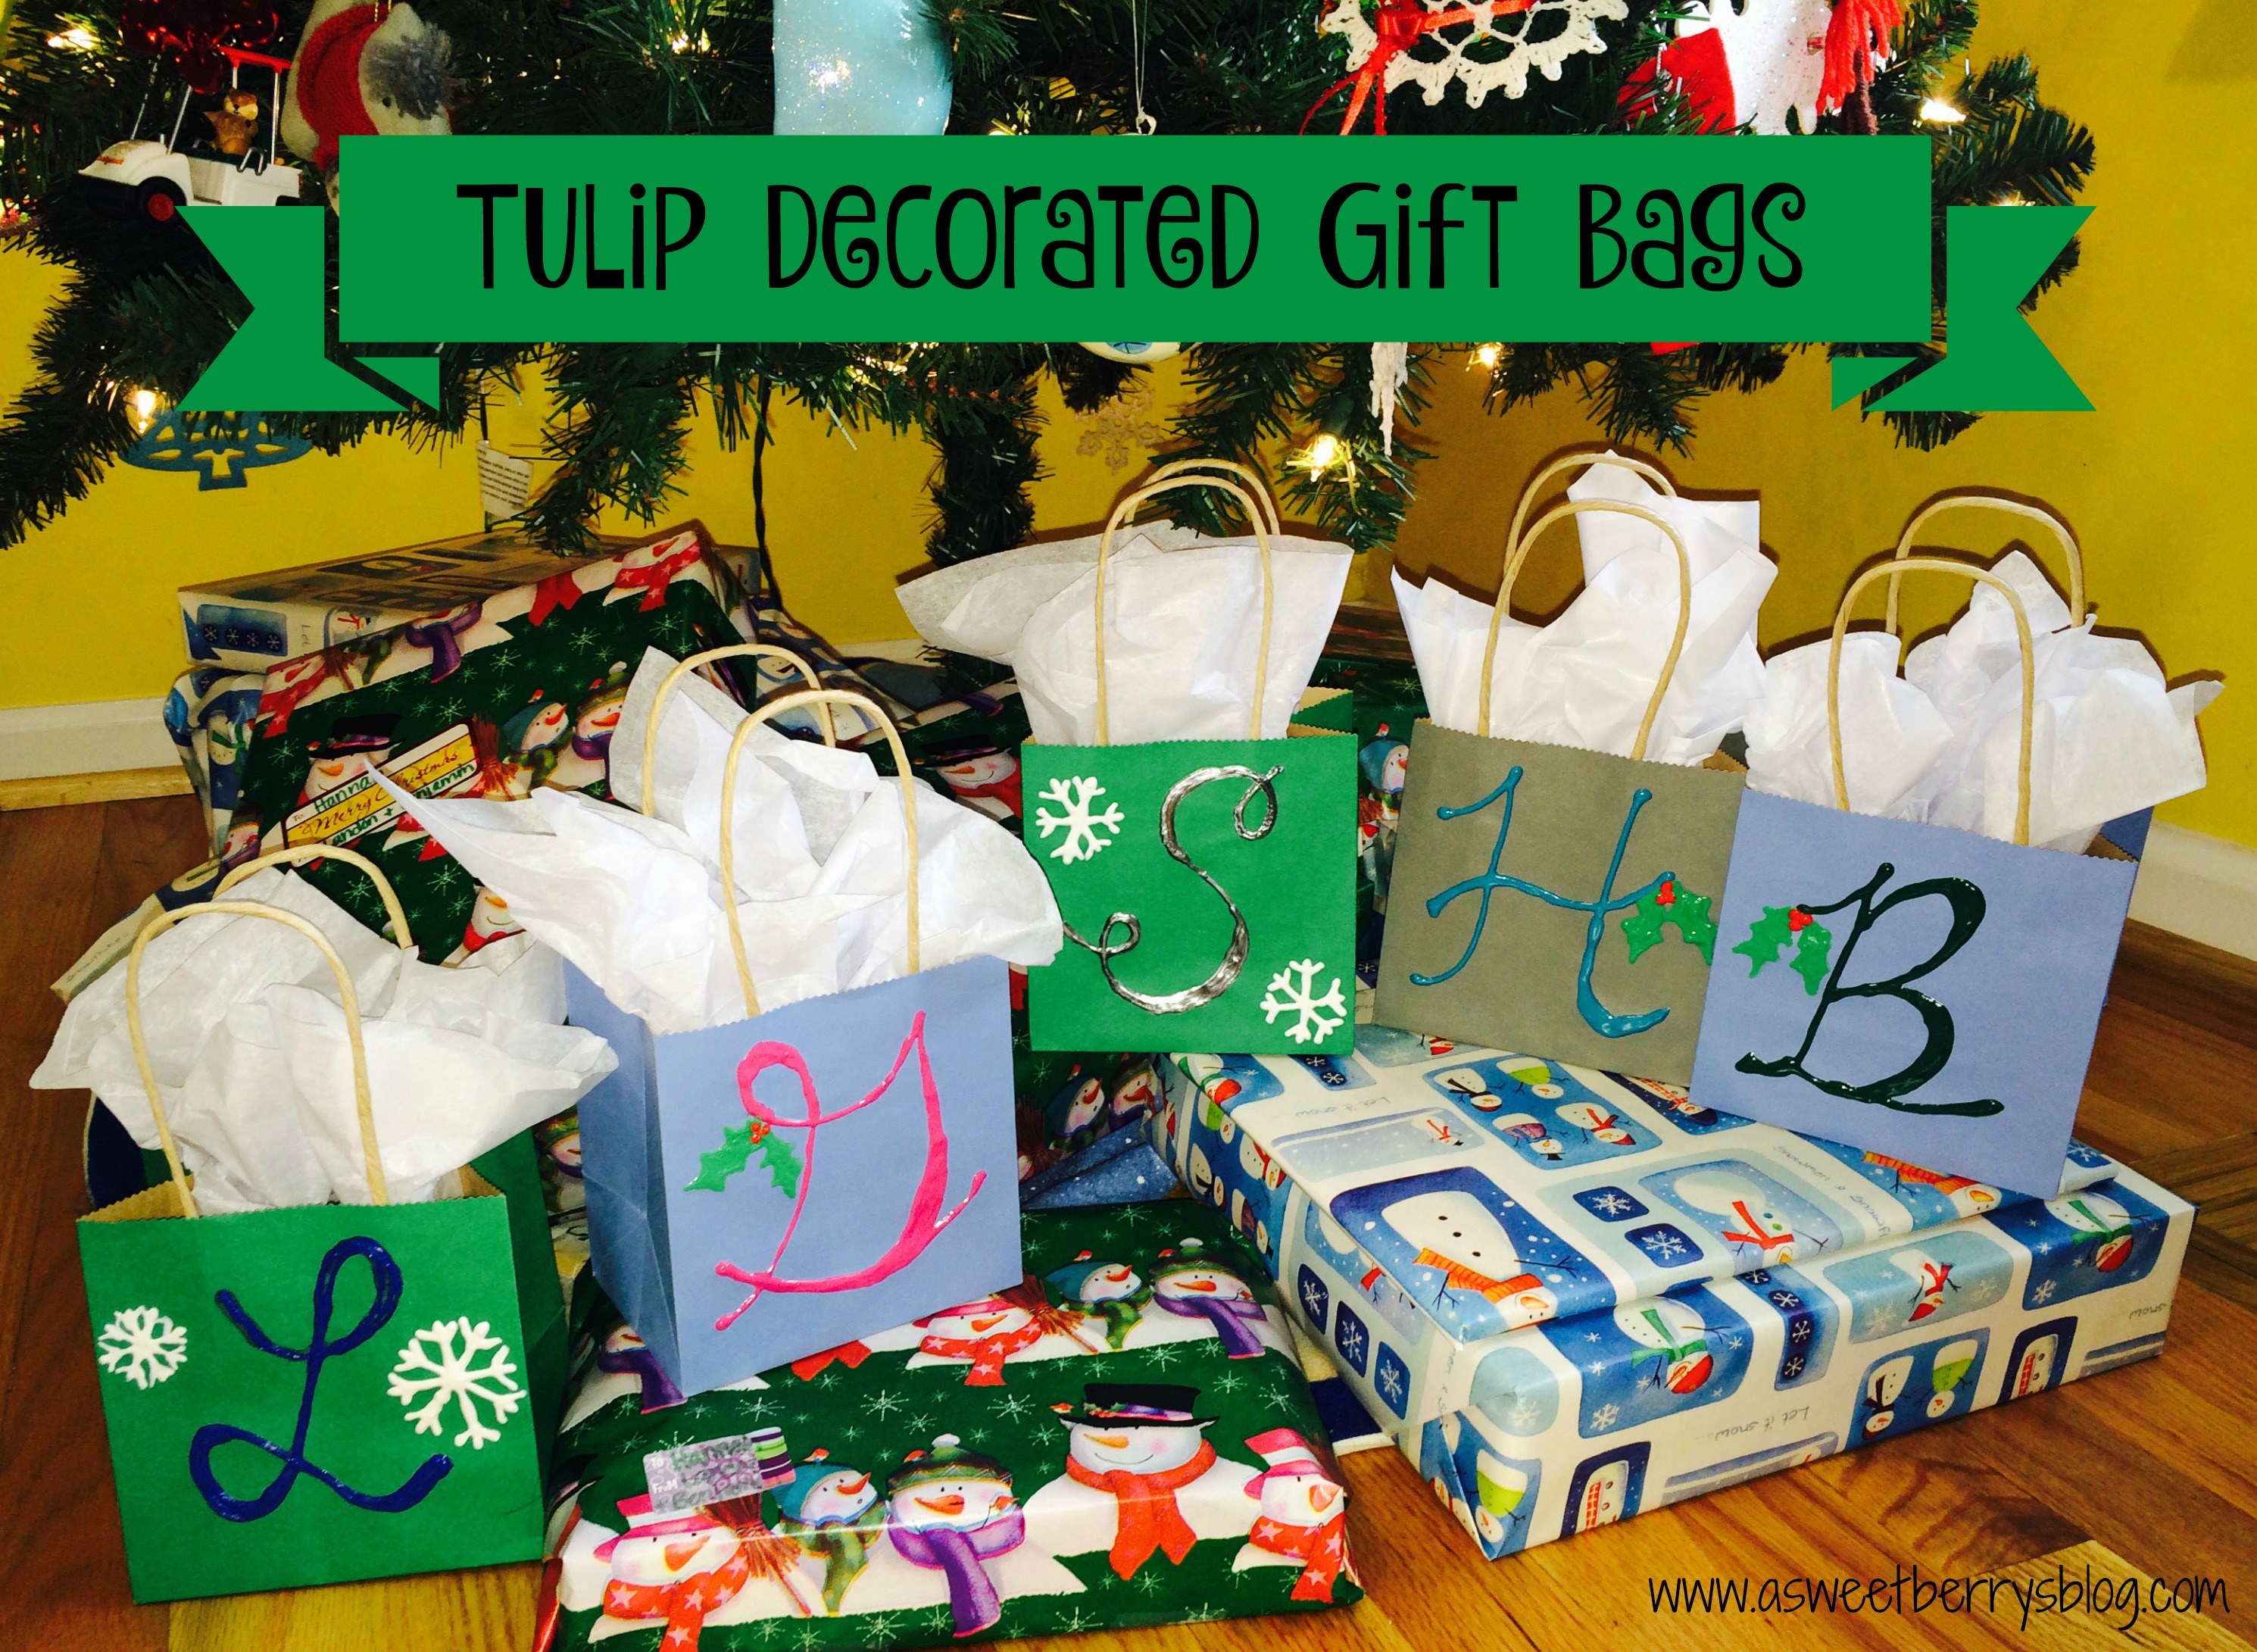 Tulip Fabric Marker Projects Galore - Laura Kelly's Inklings